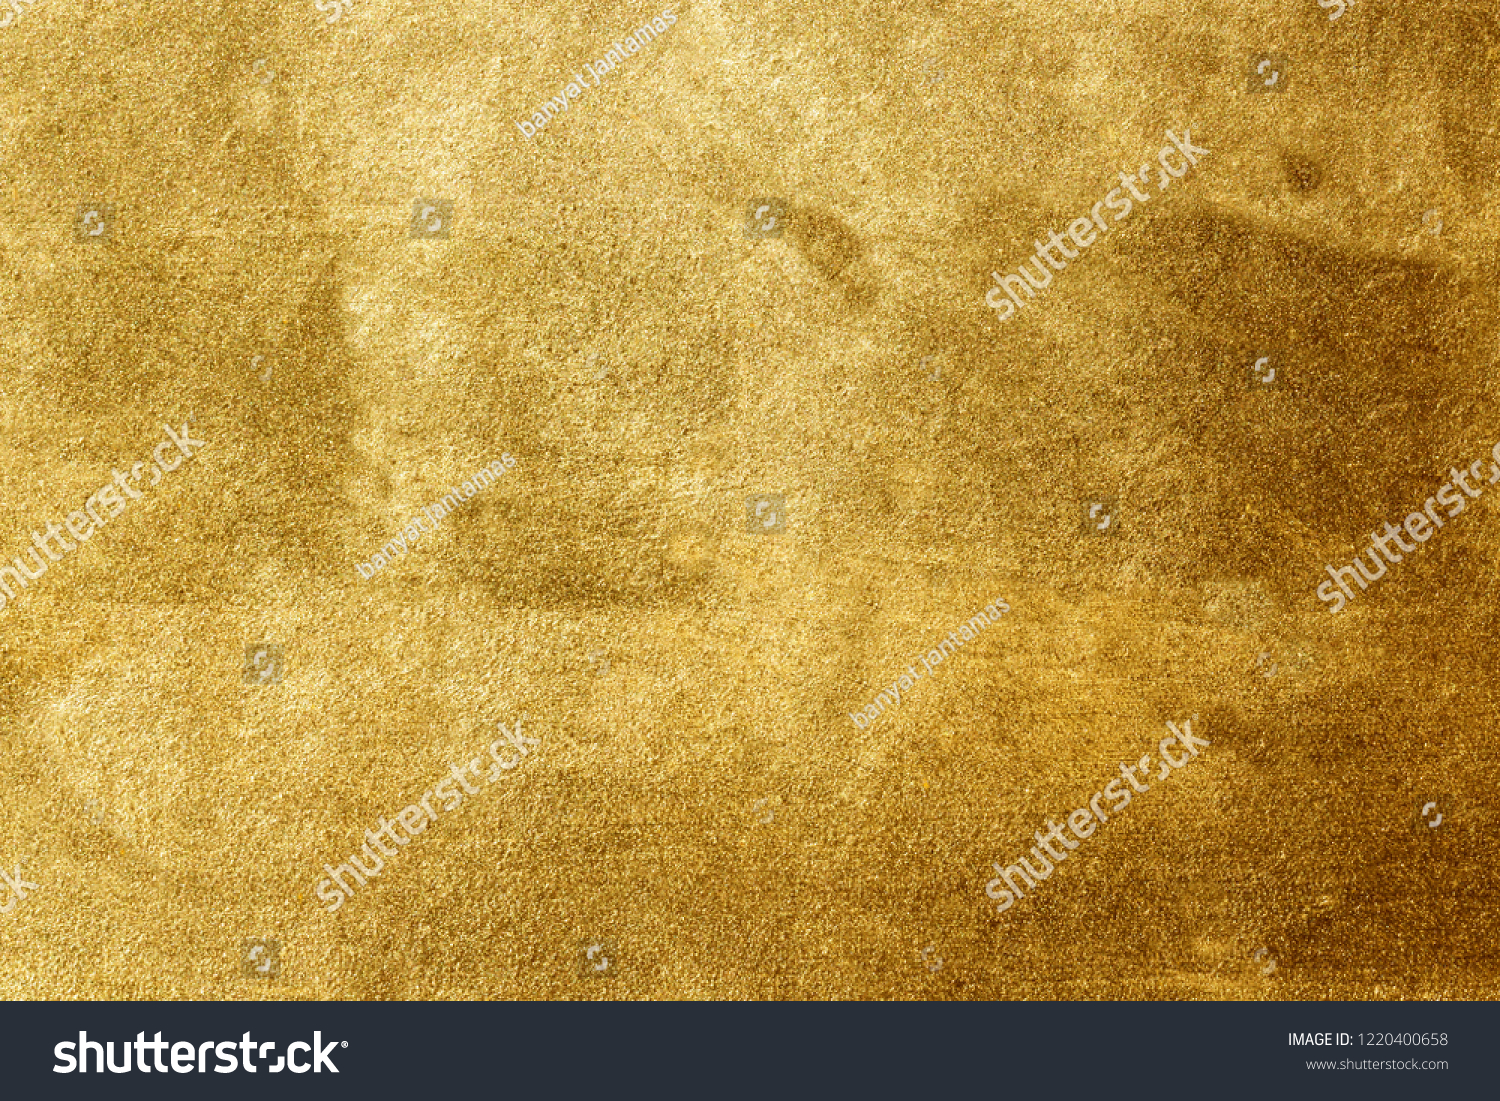 Gold background or texture and Gradients shadow. #1220400658